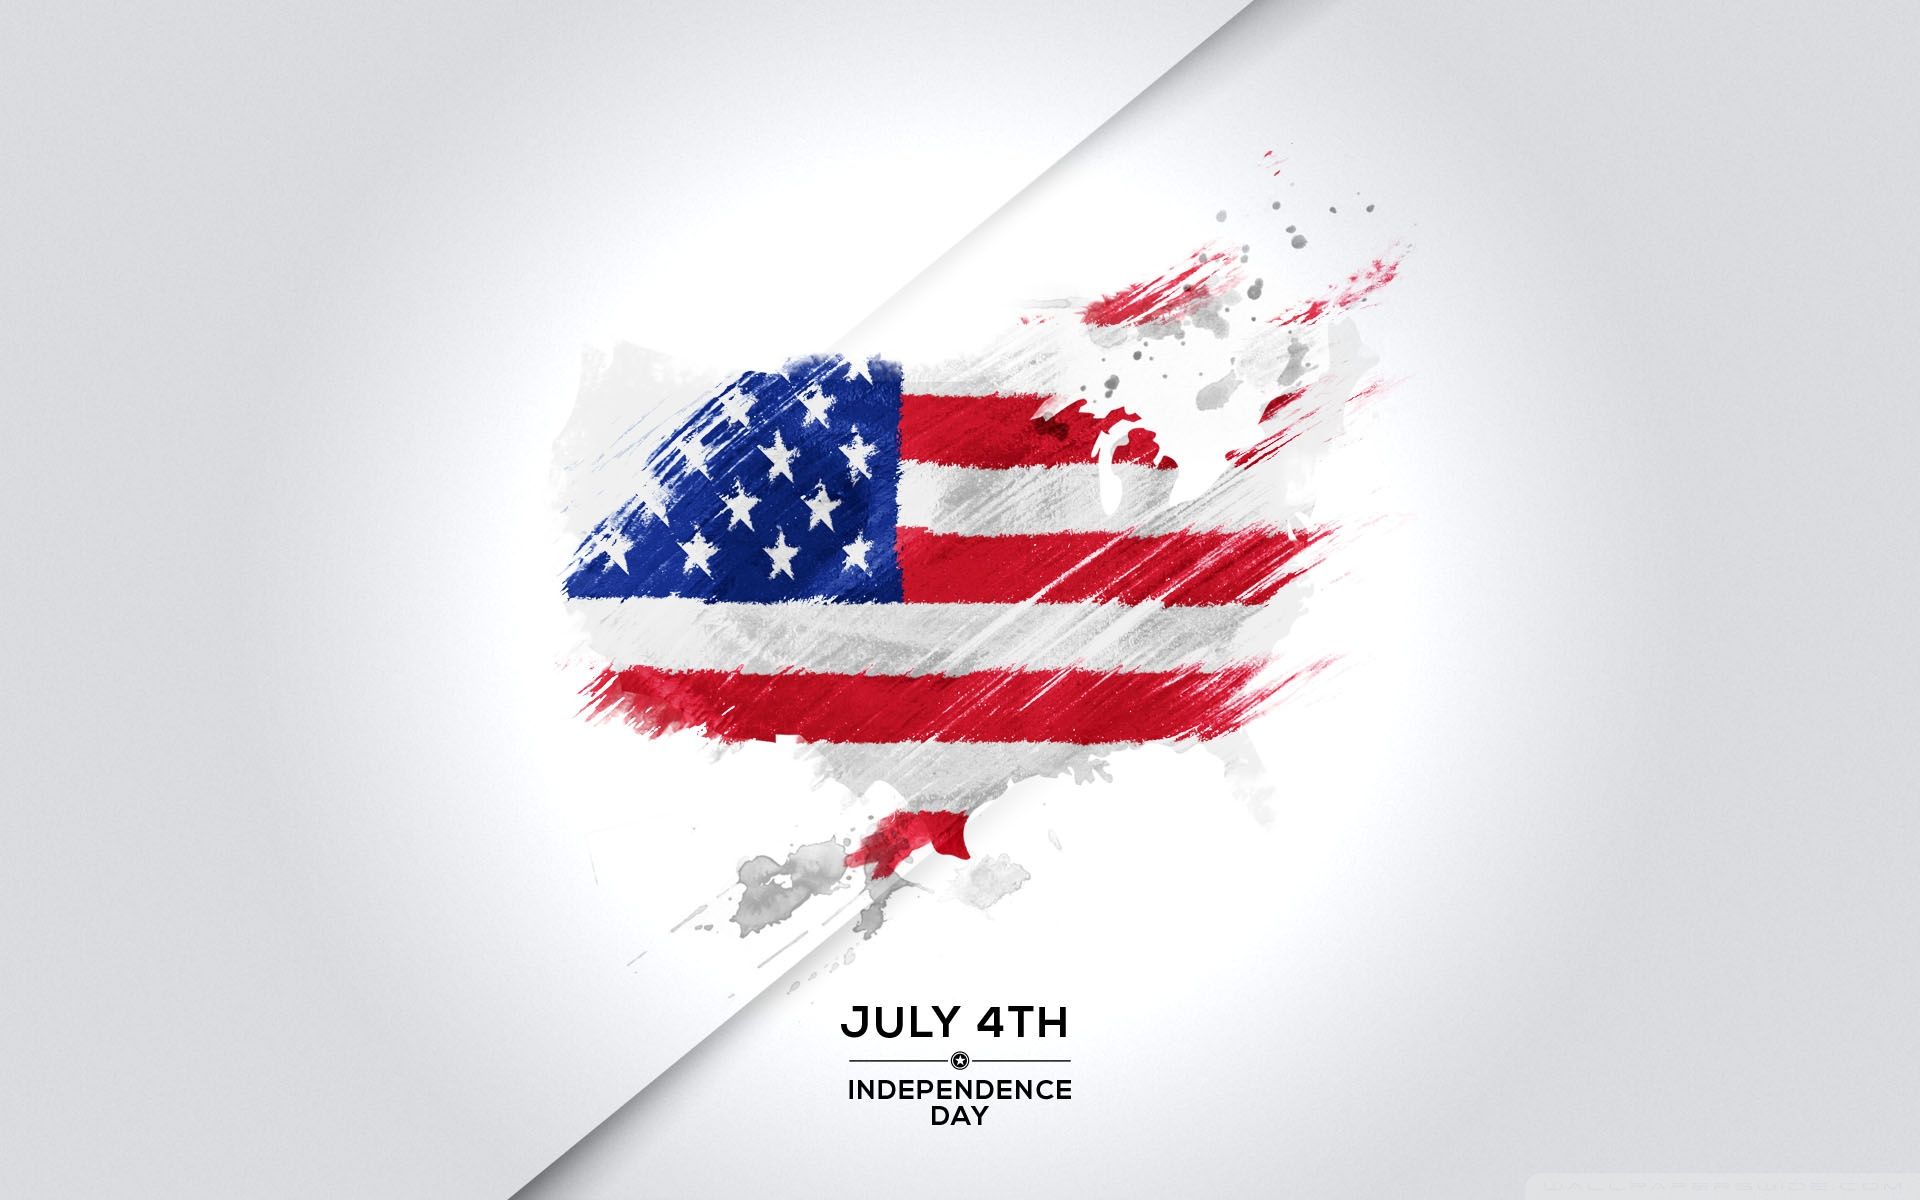 – INDEPENDENCE DAY 4 JULY